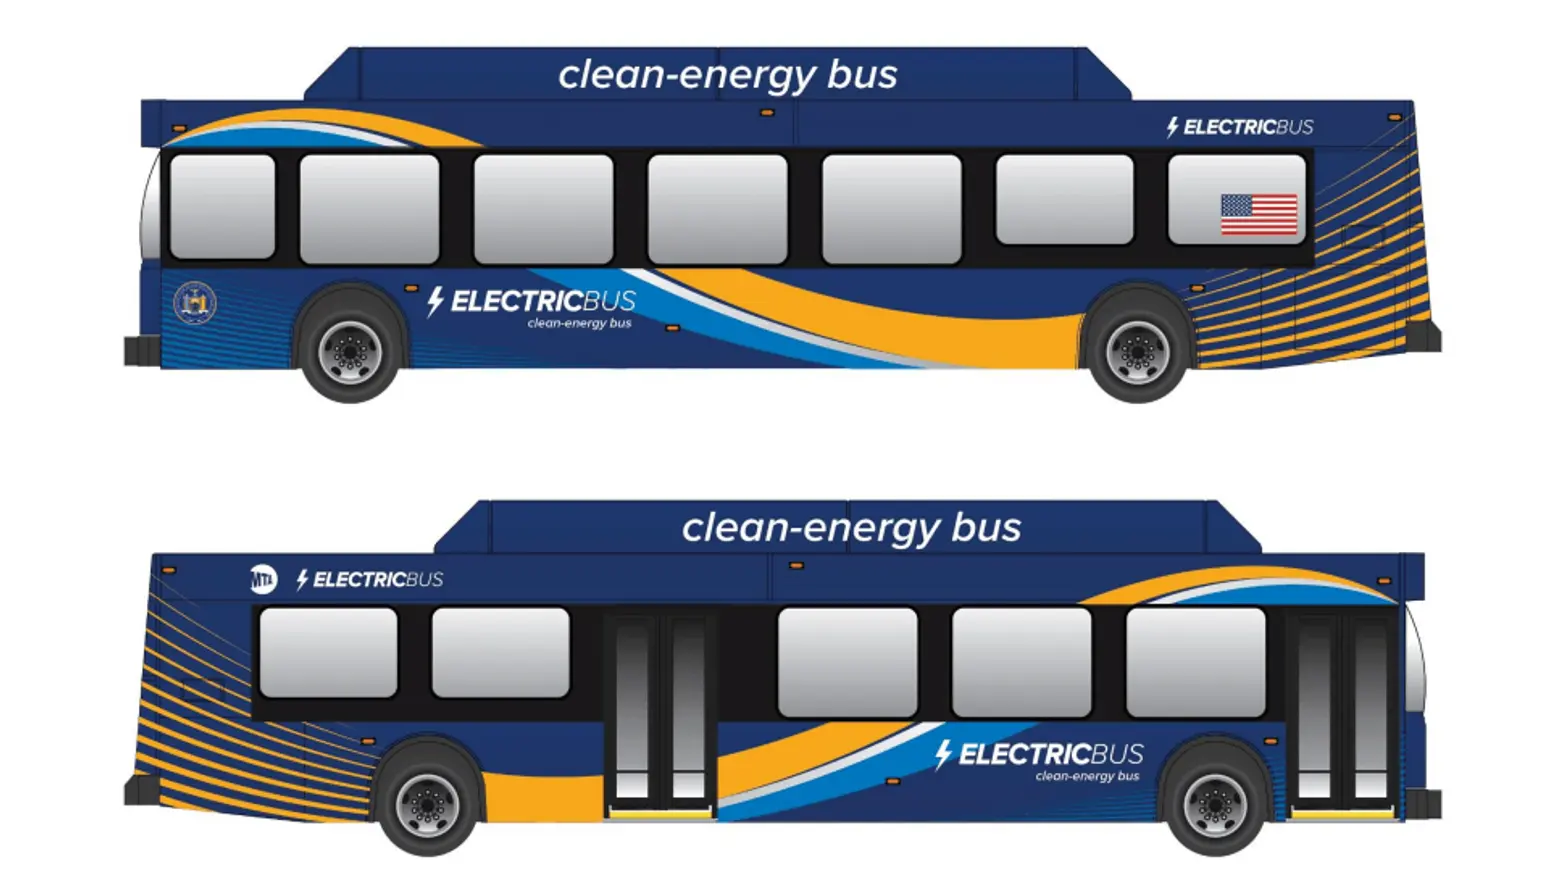 MTA electric bus, green buses, andrew cuomo